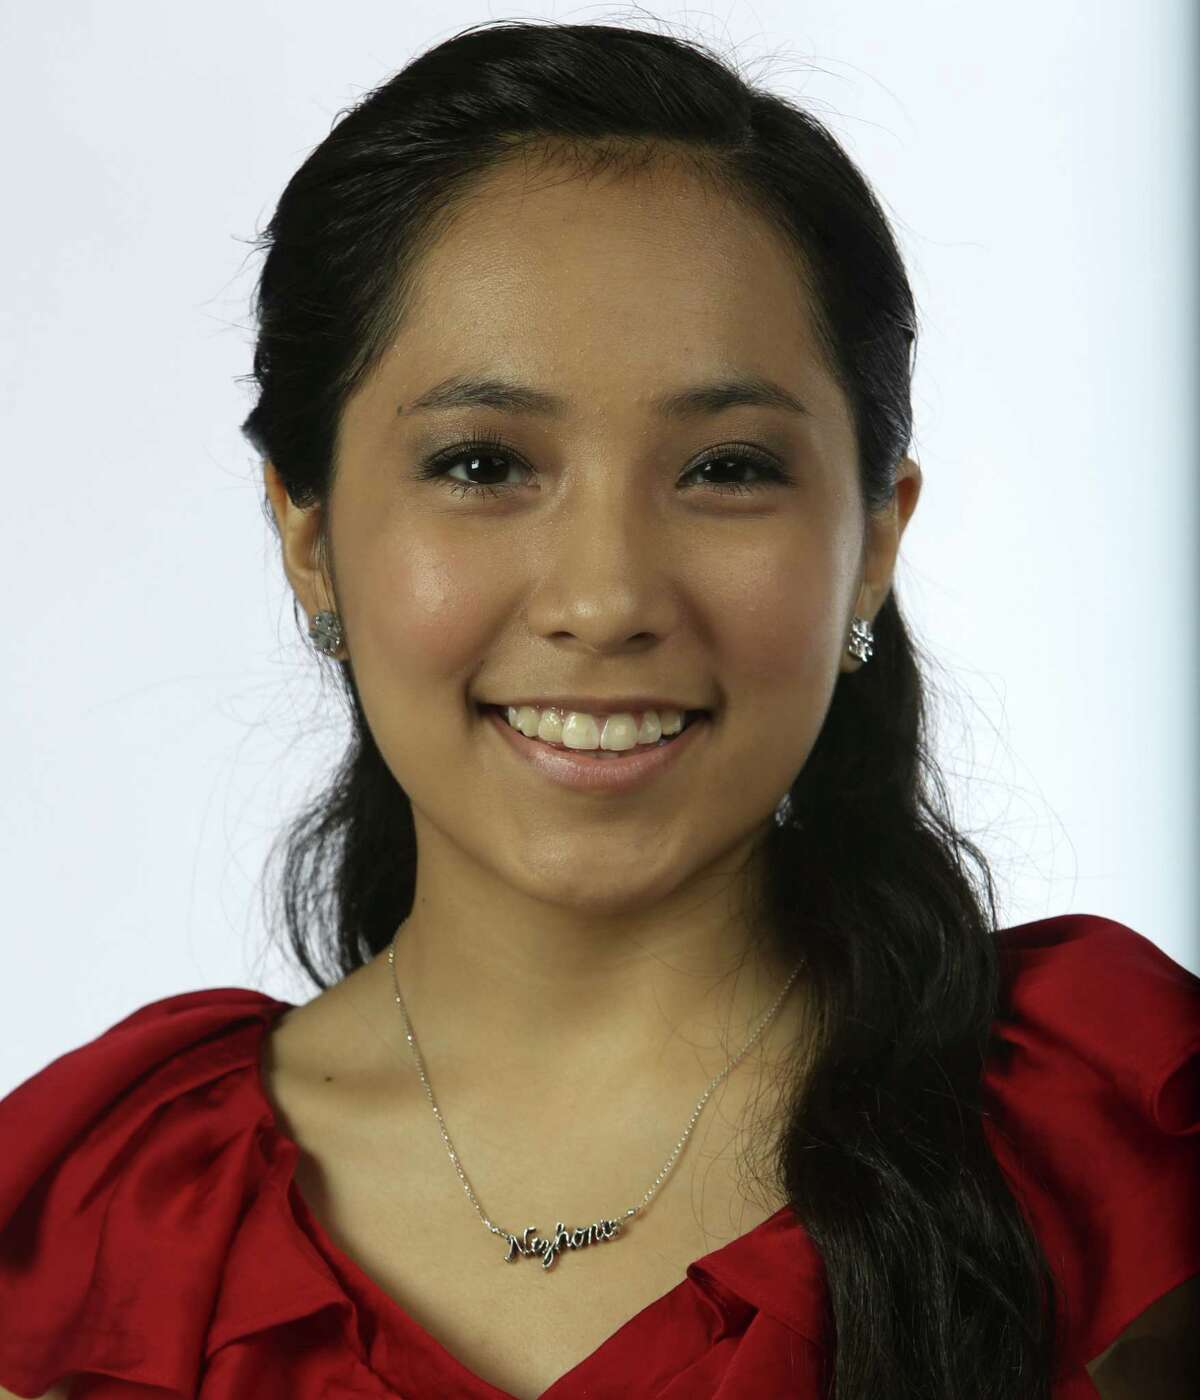 Nizhoni Begay, 16  School: Incarnate Word High School Honors: The young singer was selected as one of 20 artists in the state by the Texas Commission on the Arts to join its Young Masters Program this year. In 2013, she was part of the National Hispanic Institute’s Great Debate program and was awarded All-State Orator honors. About her: The Tucson, Arizona, native has been performing mariachi music since she was 7 years old. “I love mariachi so much,” she says. “It’s so powerful. It creates such an emotional connection.” She’s a member of the Mariachi Corazón de San Antonio, an all-star high school mariachi group that represents the city of San Antonio, and she’s mentored younger mariachi students. Her mariachi skills earned her first-place honors in the high school vocal competition in the prestigious Mariachi Vargas Extravaganza in 2012.